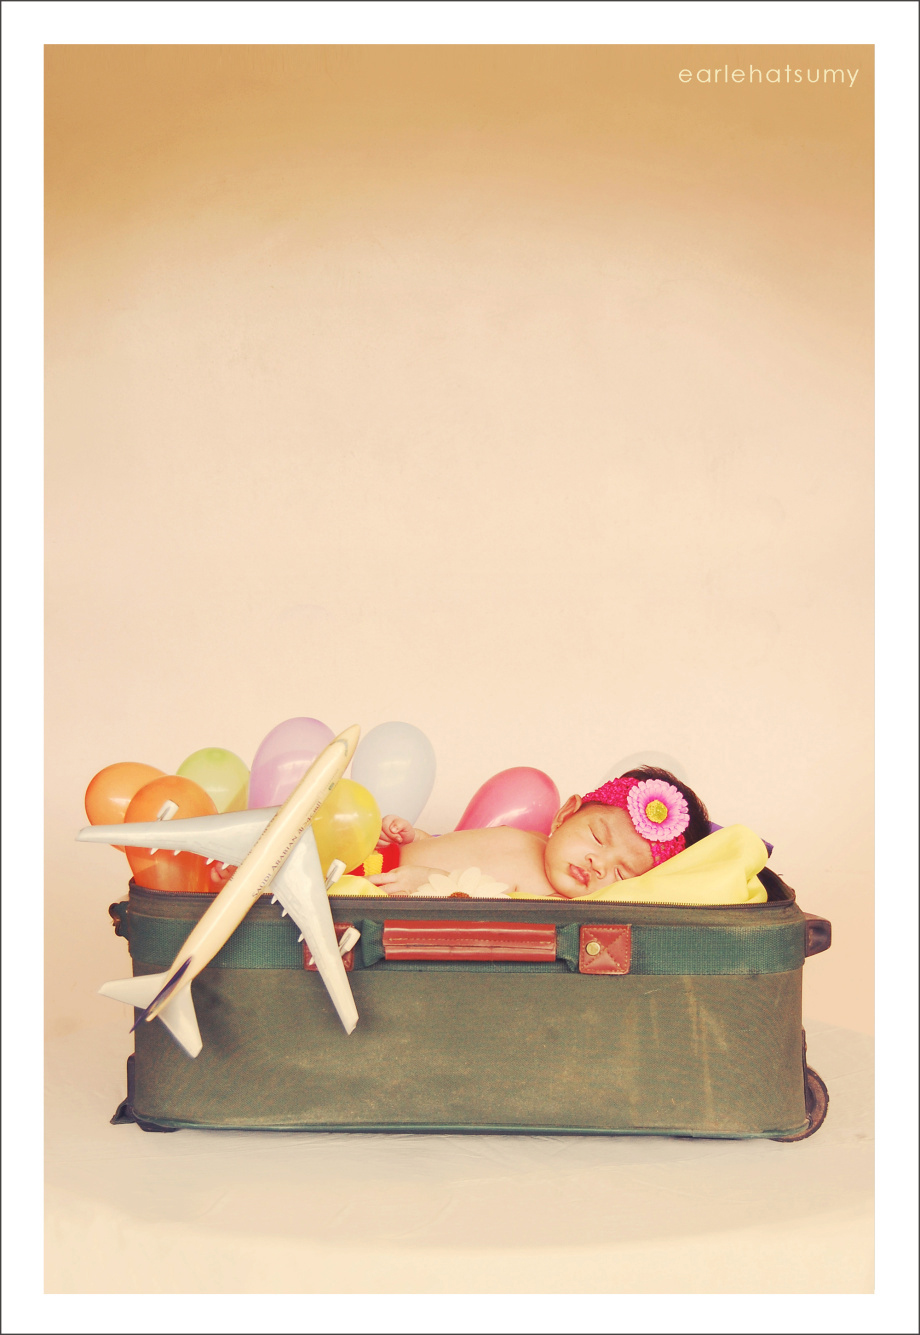 Baby in a luggage